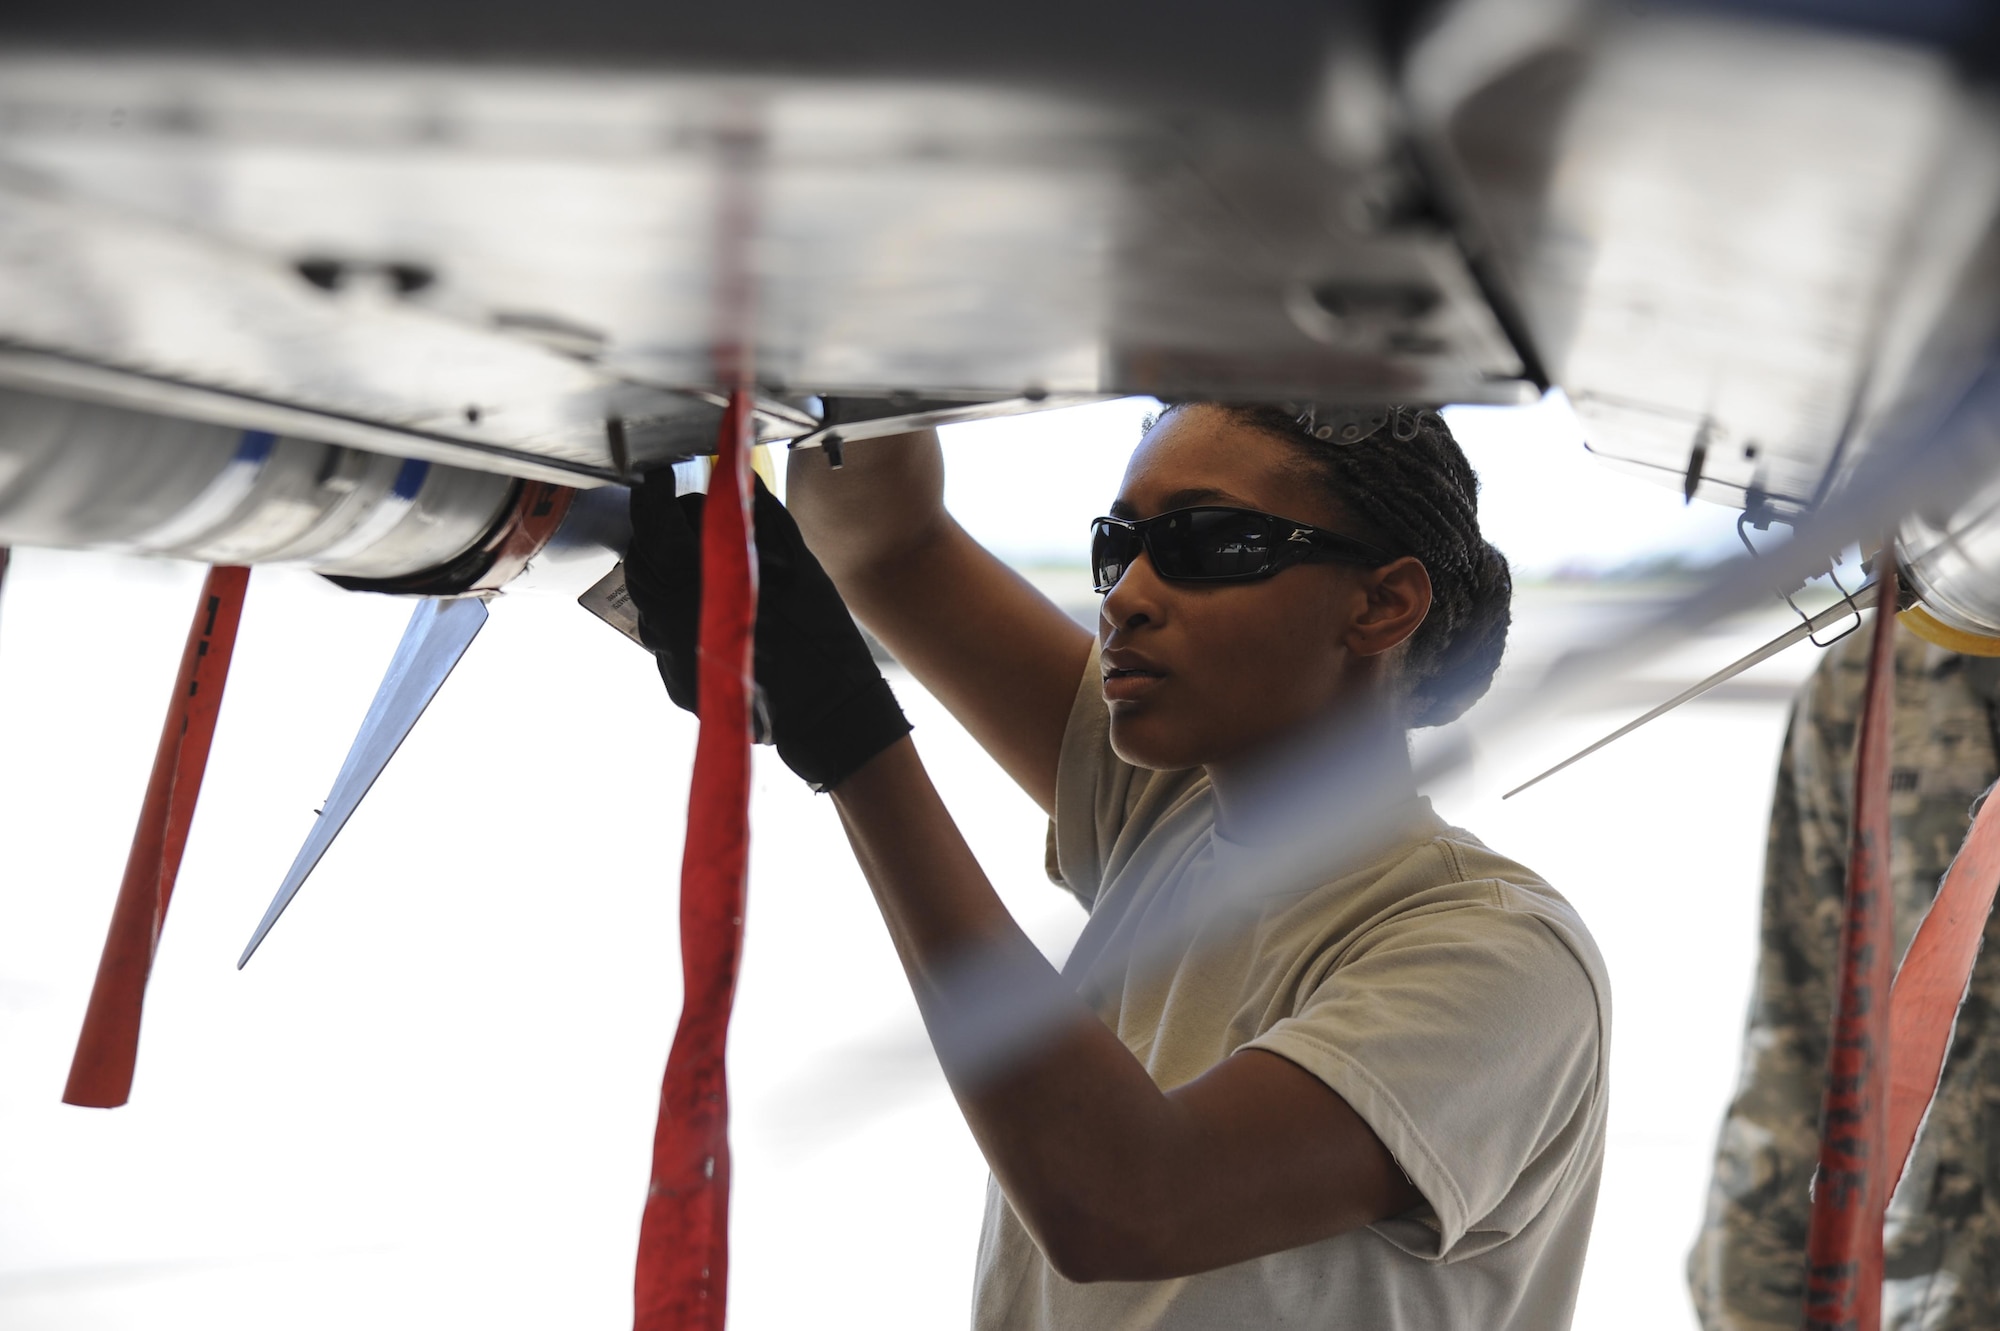 U.S. Air Force Airman Brittany Wade, 354th Aircraft Maintenance Unit weapons crew member, loads an AIM-9 Sidewinder missile onto an A-10C Thunderbolt II during a load crew of the quarter competition at Davis-Monthan Air Force Base, Ariz., Oct. 7, 2016. The objective of the contest is to determine which team can most efficiently load munitions onto an A-10. (U.S. Air Force photo by Airman 1st Class Mya M. Crosby)